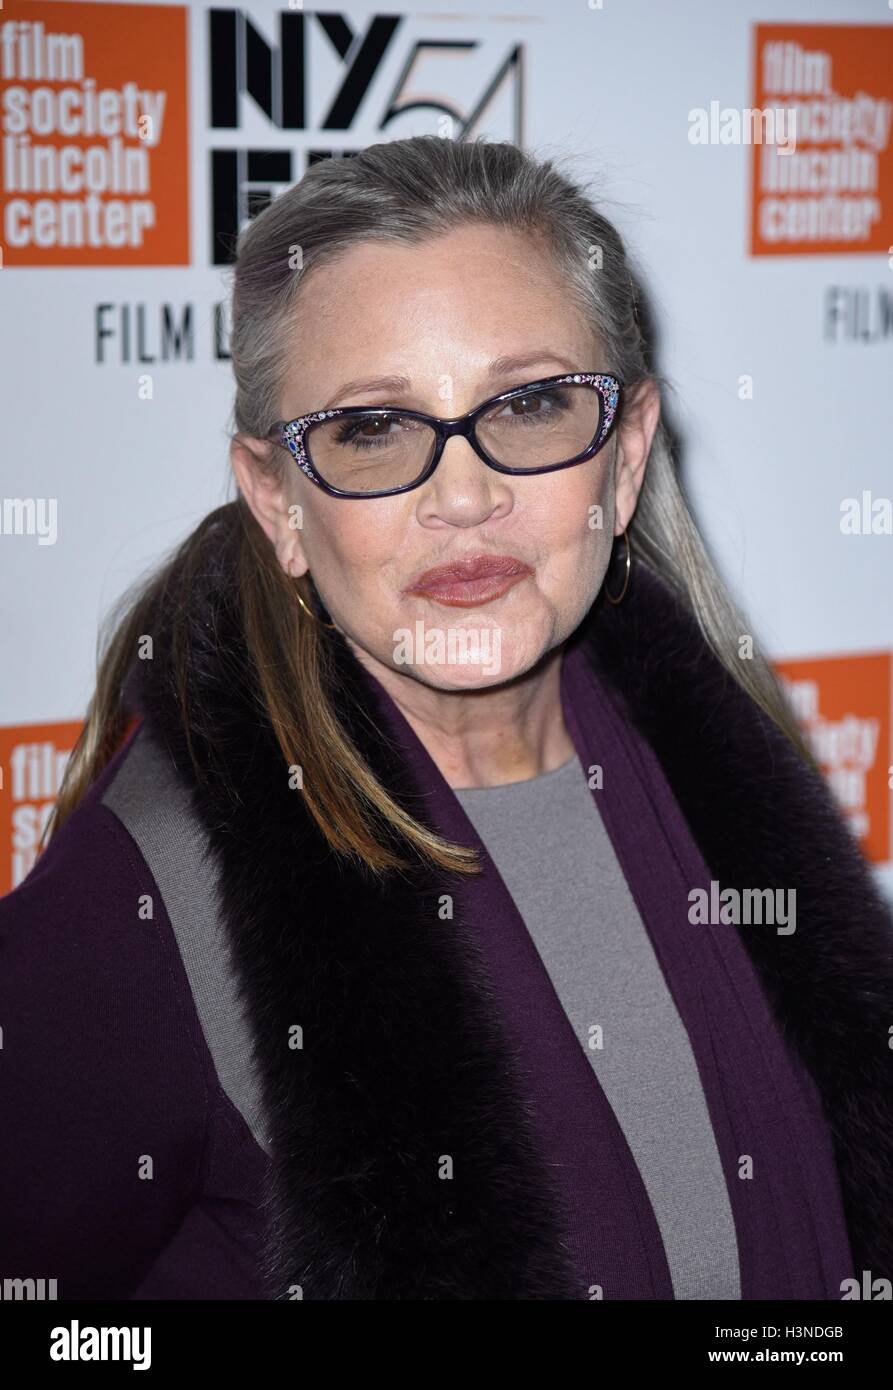 New York, NY, USA. 10th Oct, 2016. Carrie Fisher at arrivals for BRIGHT LIGHTS: STARRING CARRIE FISHER AND DEBBIE REYNOLDS Premiere at the 54th New York Film Festival, Alice Tully Hall at Lincoln Center, New York, NY October 10, 2016. Credit:  Derek Storm/Everett Collection/Alamy Live News Stock Photo